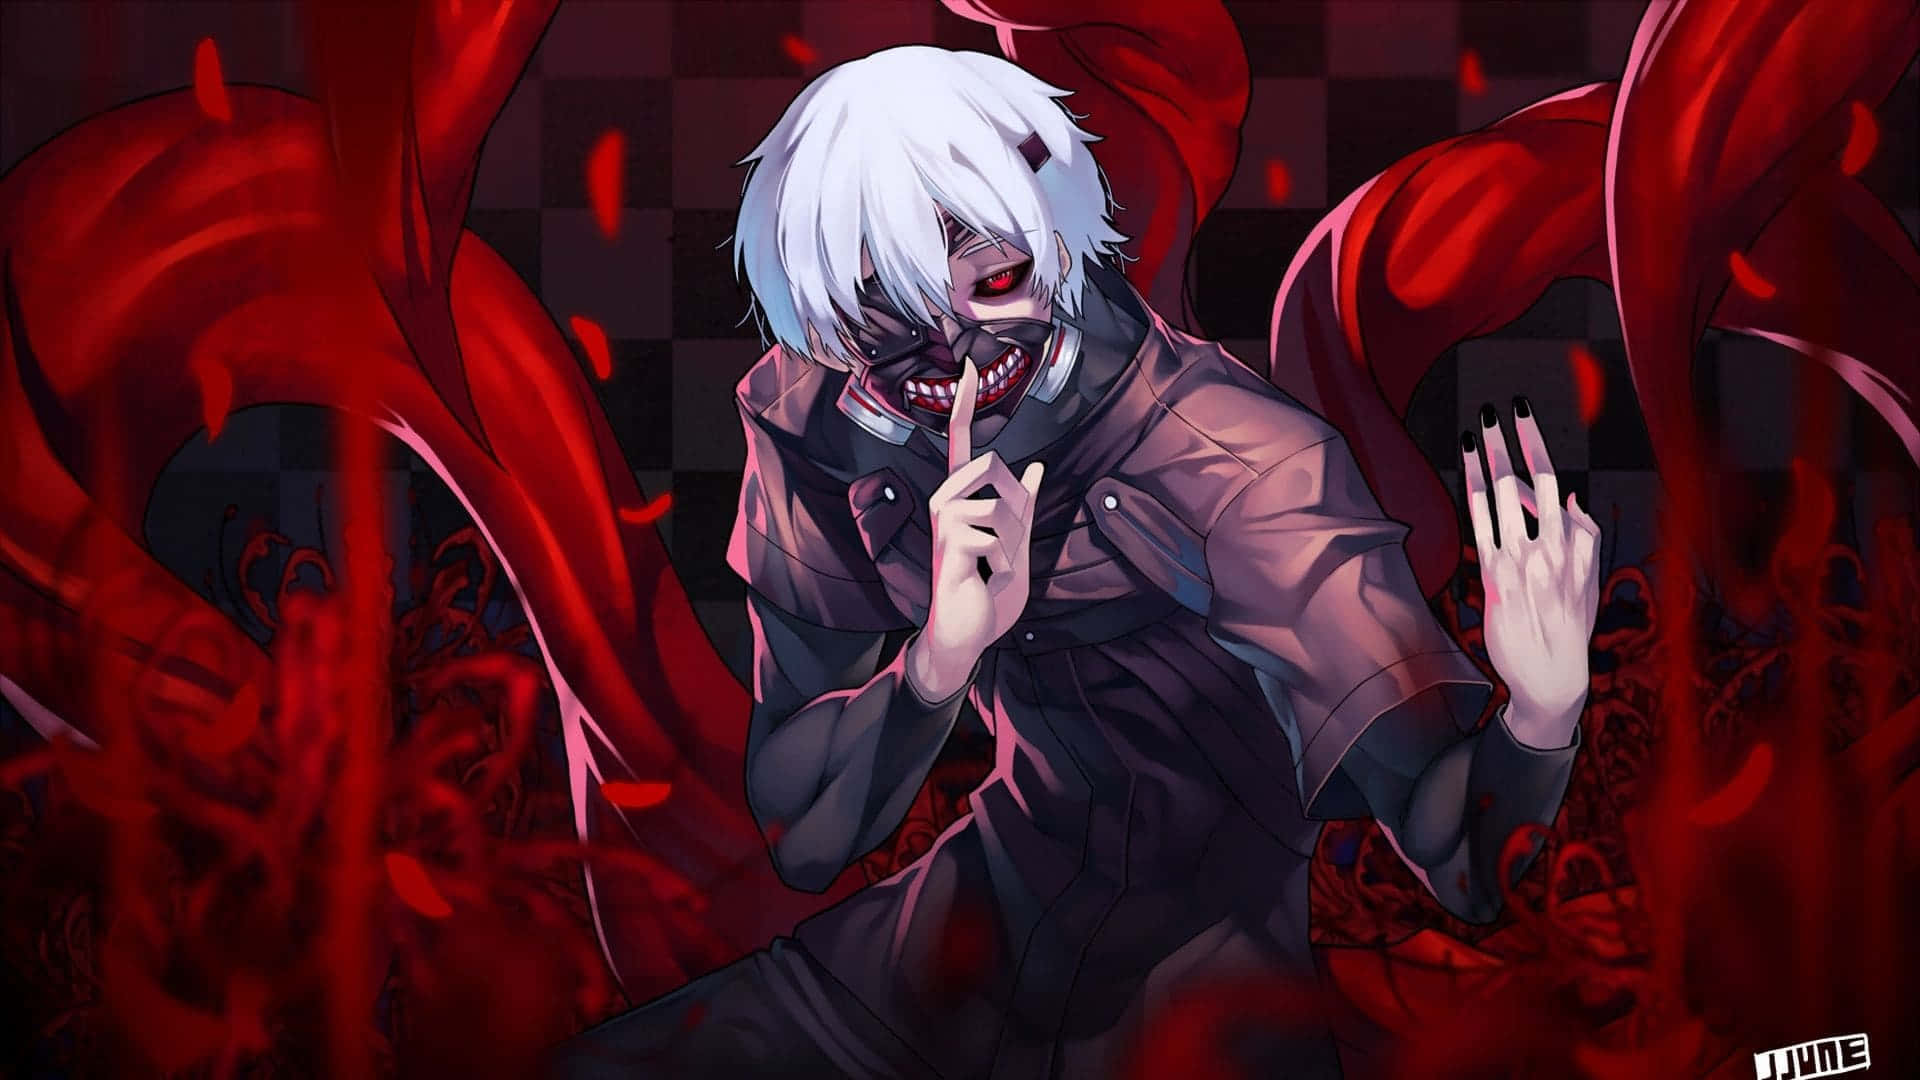 Take a tour of Tokyo Ghoul's dark and mysterious world. Wallpaper